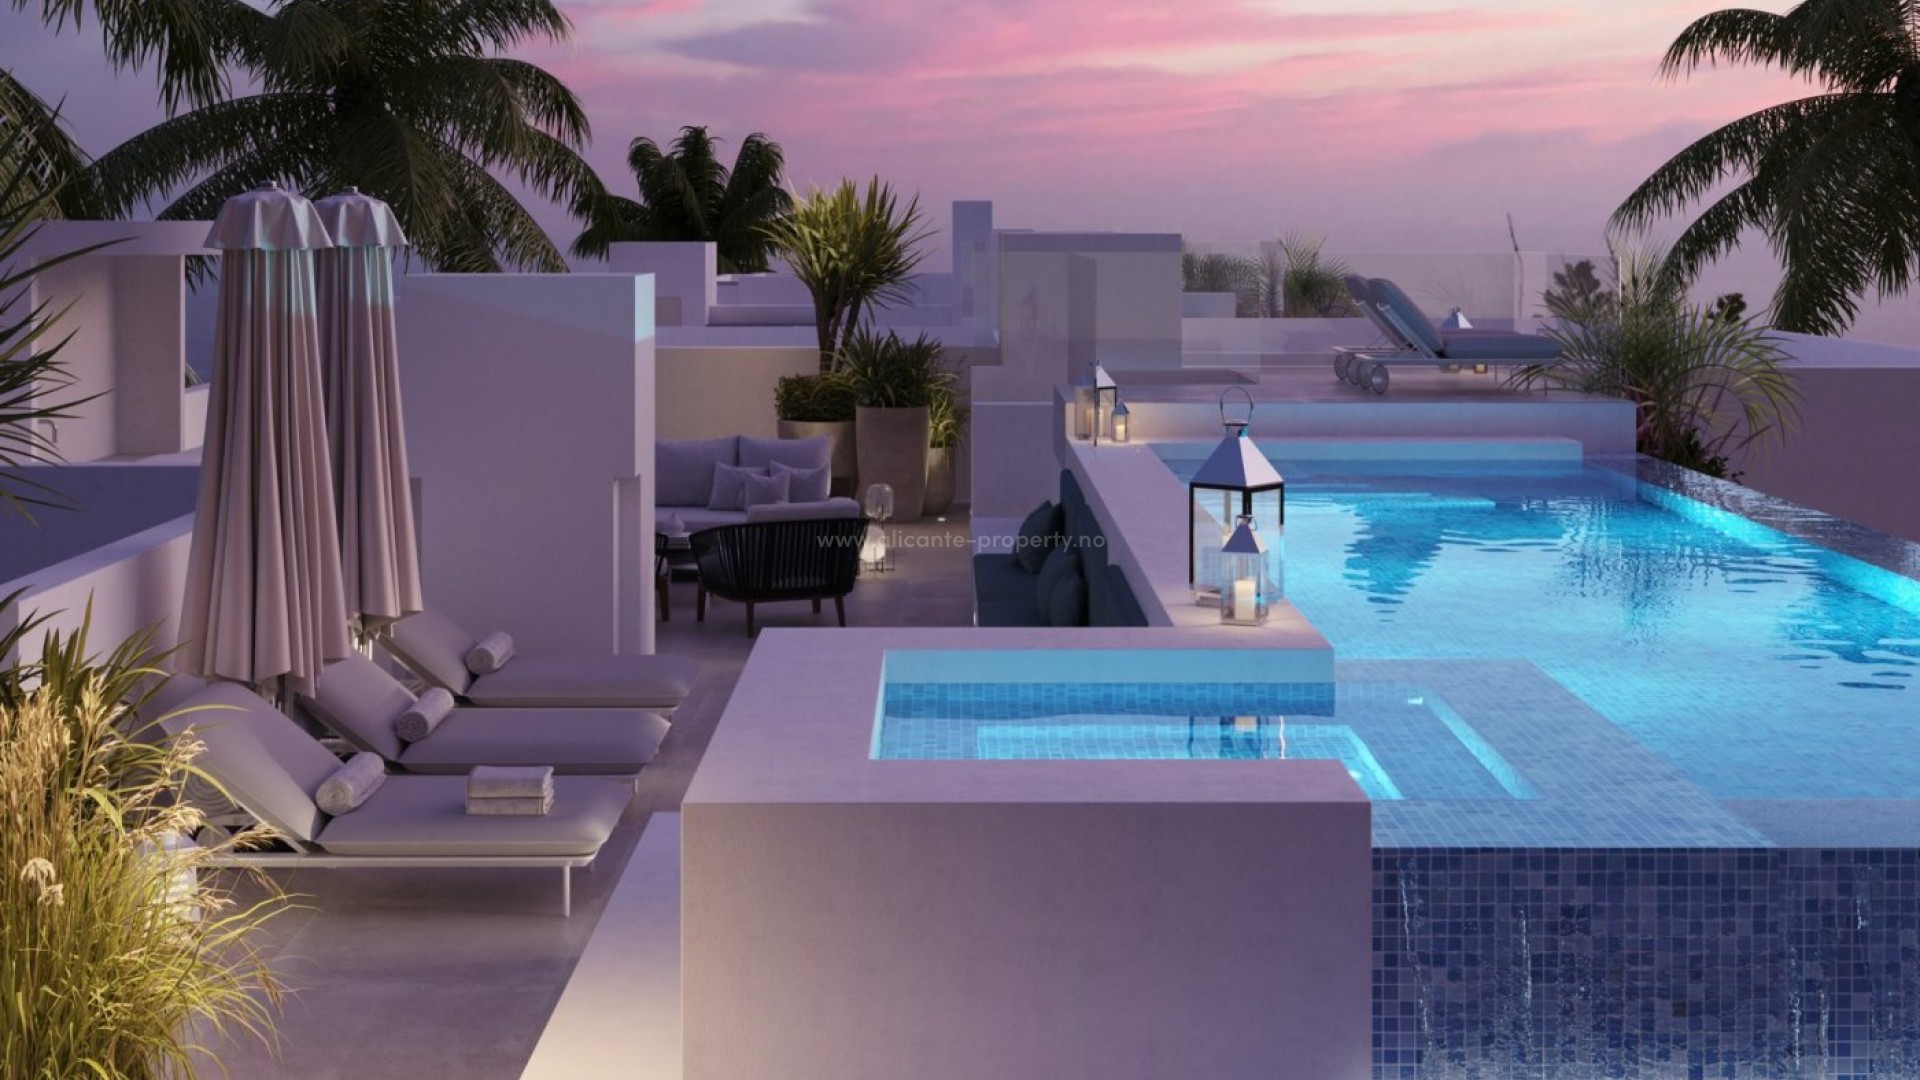 Brand new luxury apartments in Las Colinas Golf, Country Club, 3 bedrooms, 2 bathrooms, wine room, ground floor apartments and penthouses have private swimming pools